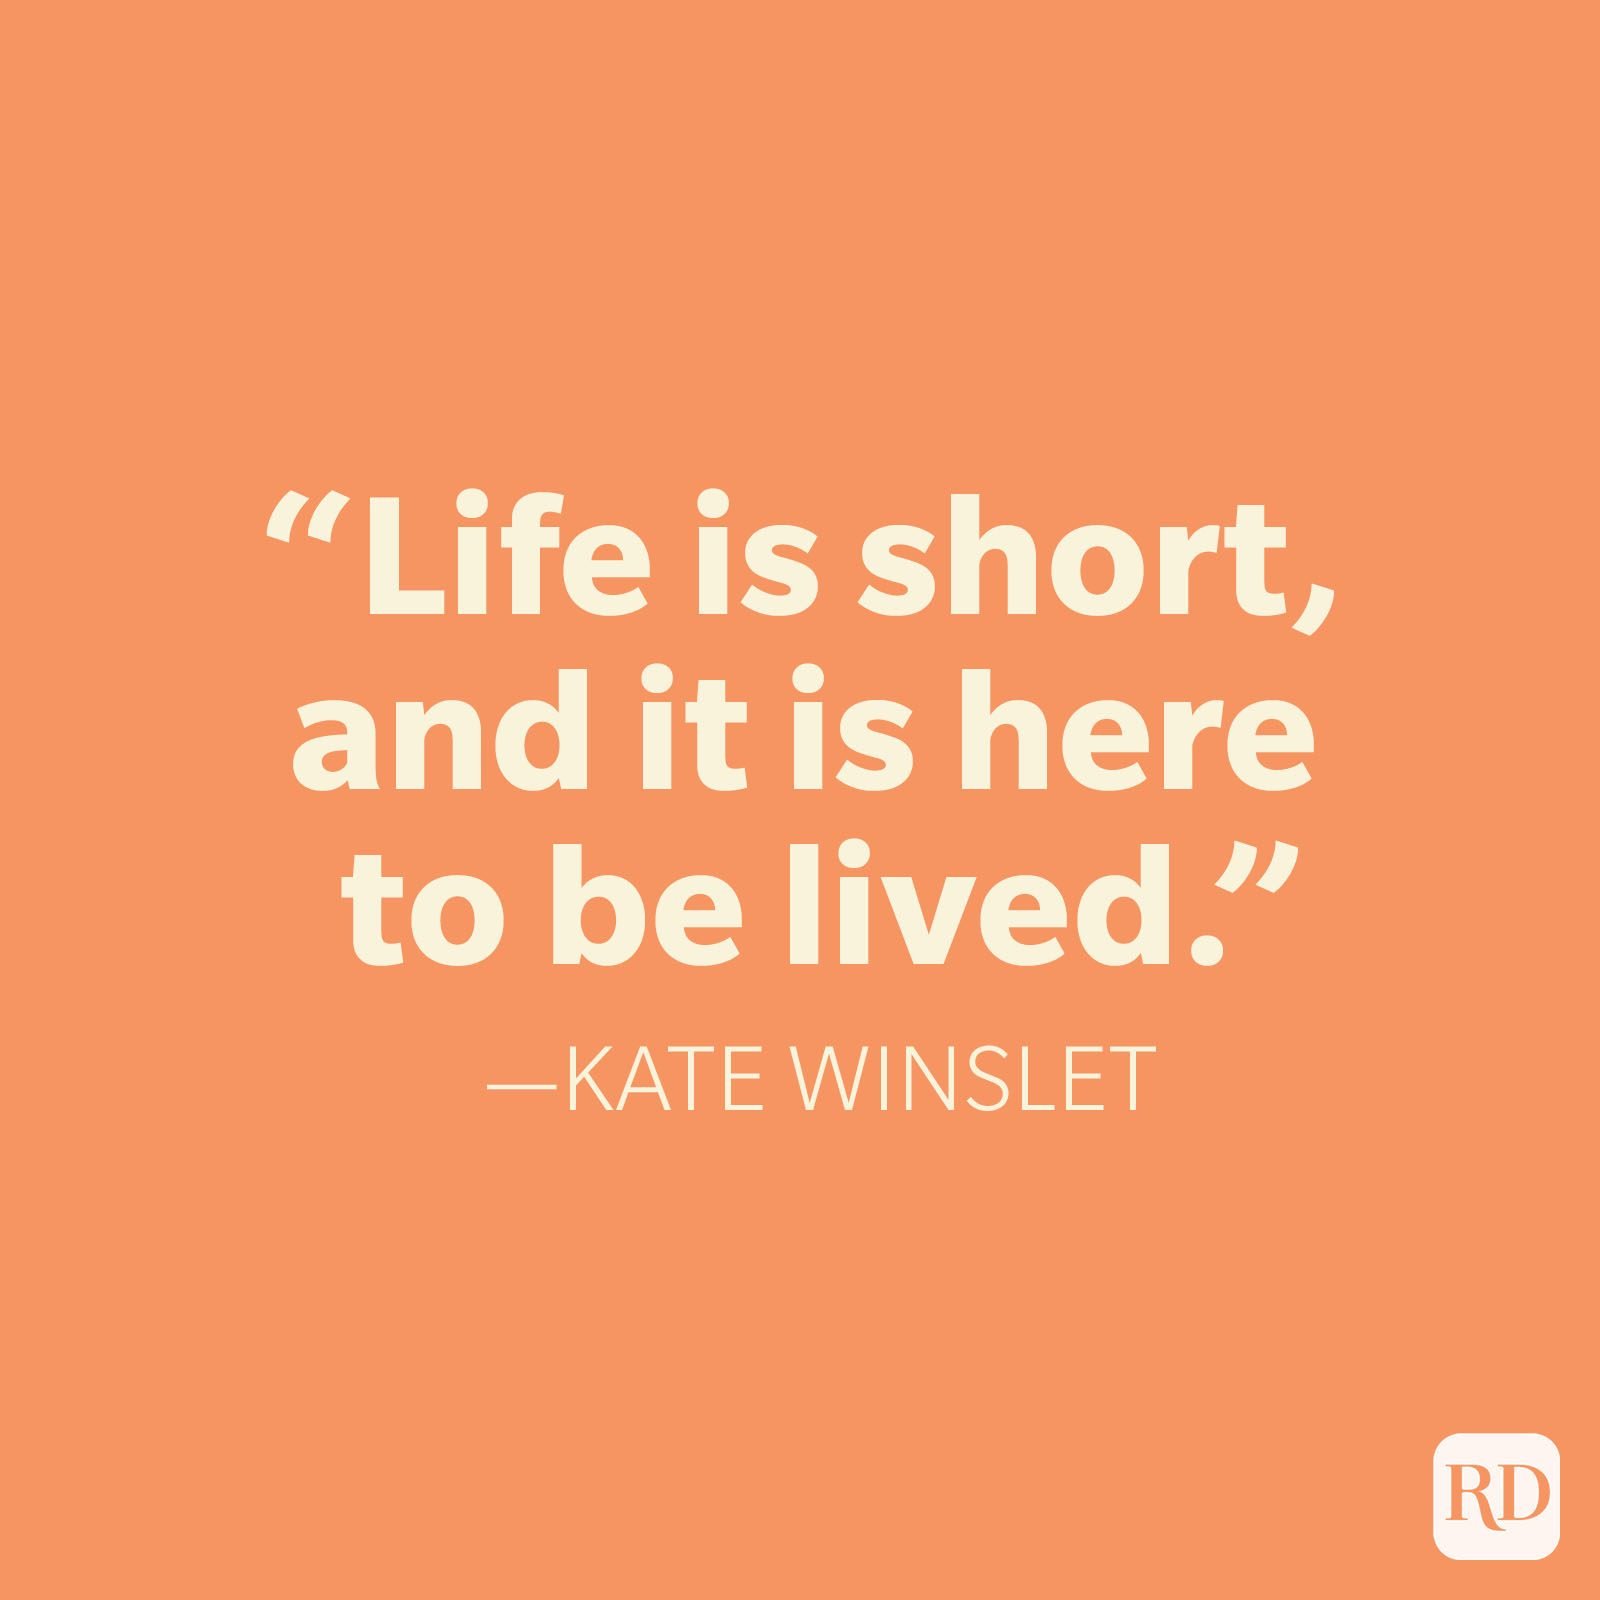 25 Life Is Short Quotes That Motivate and Inspire Reader's Digest